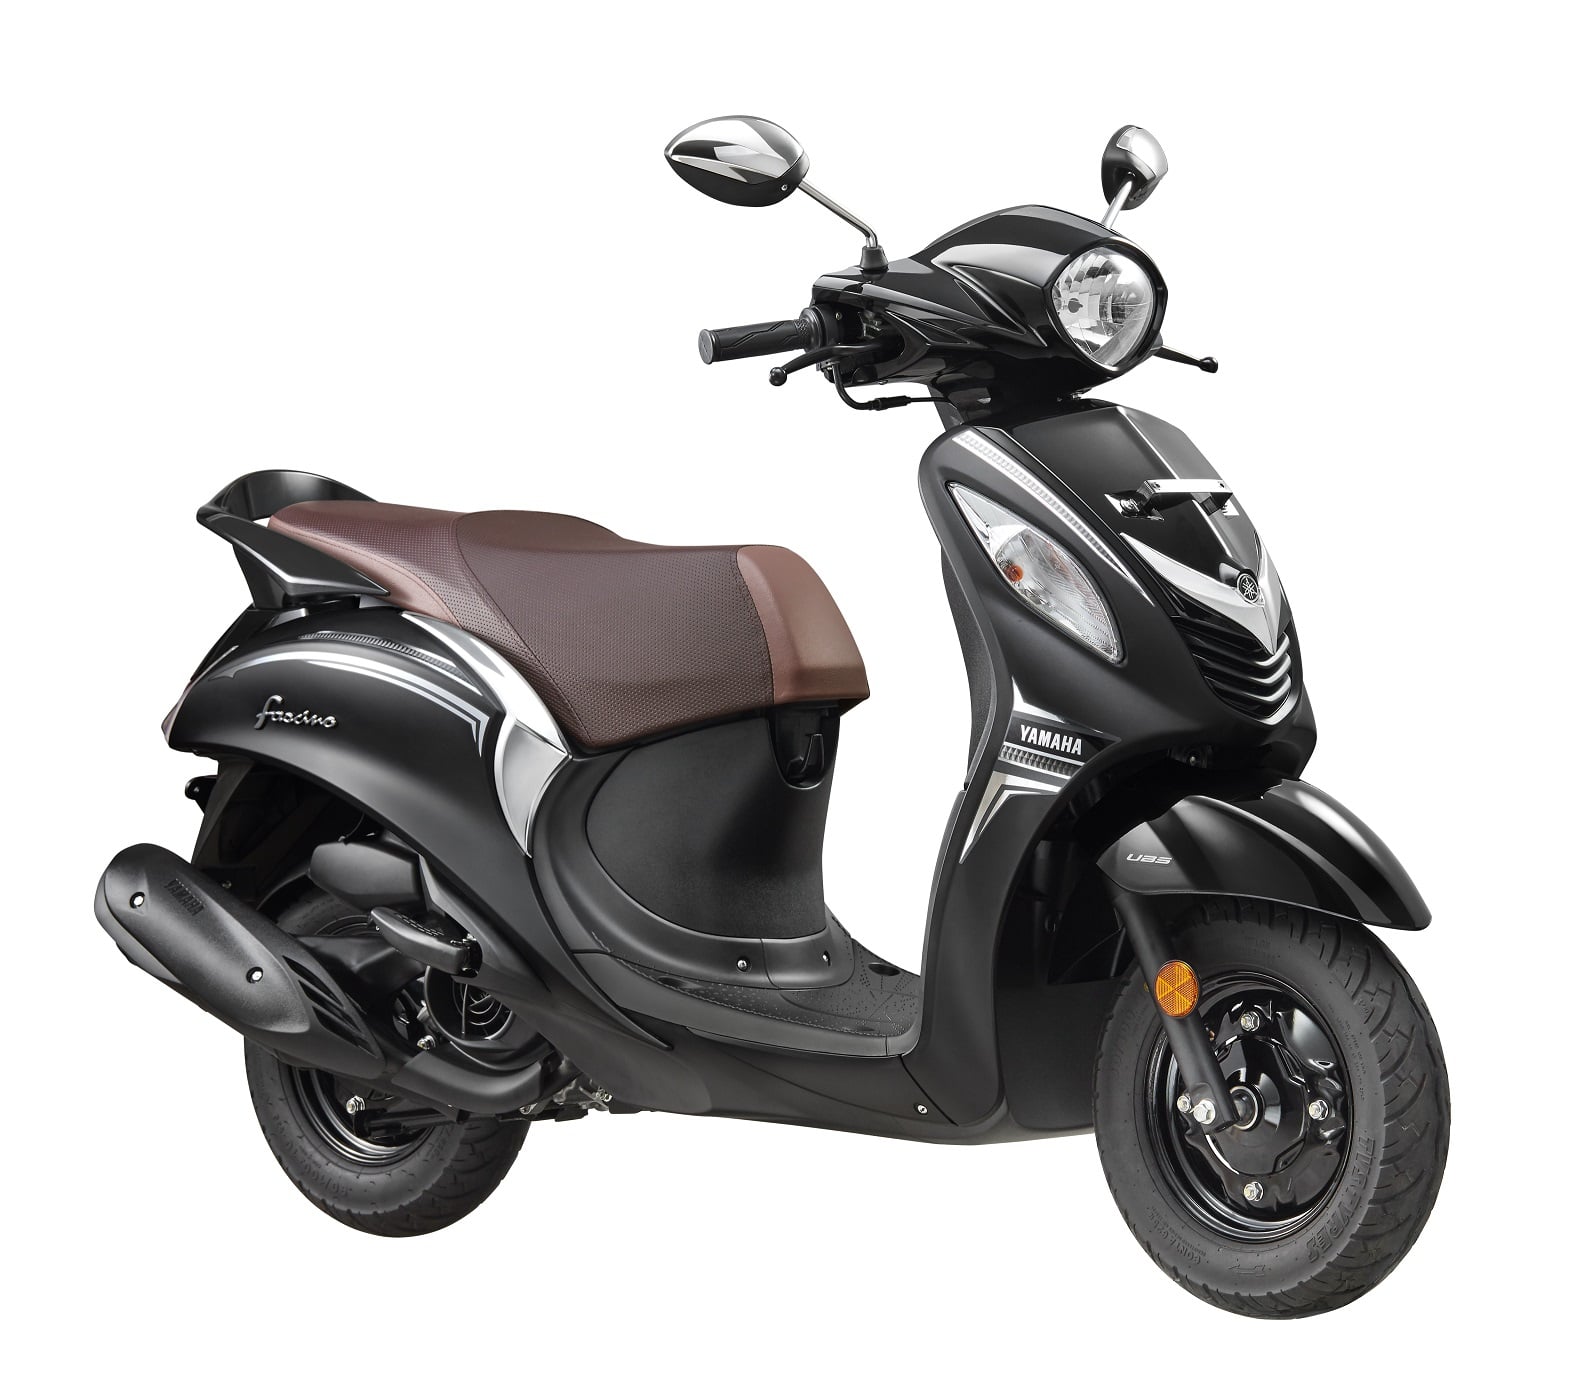 Yamaha Fascino gets a new Darknight colour option